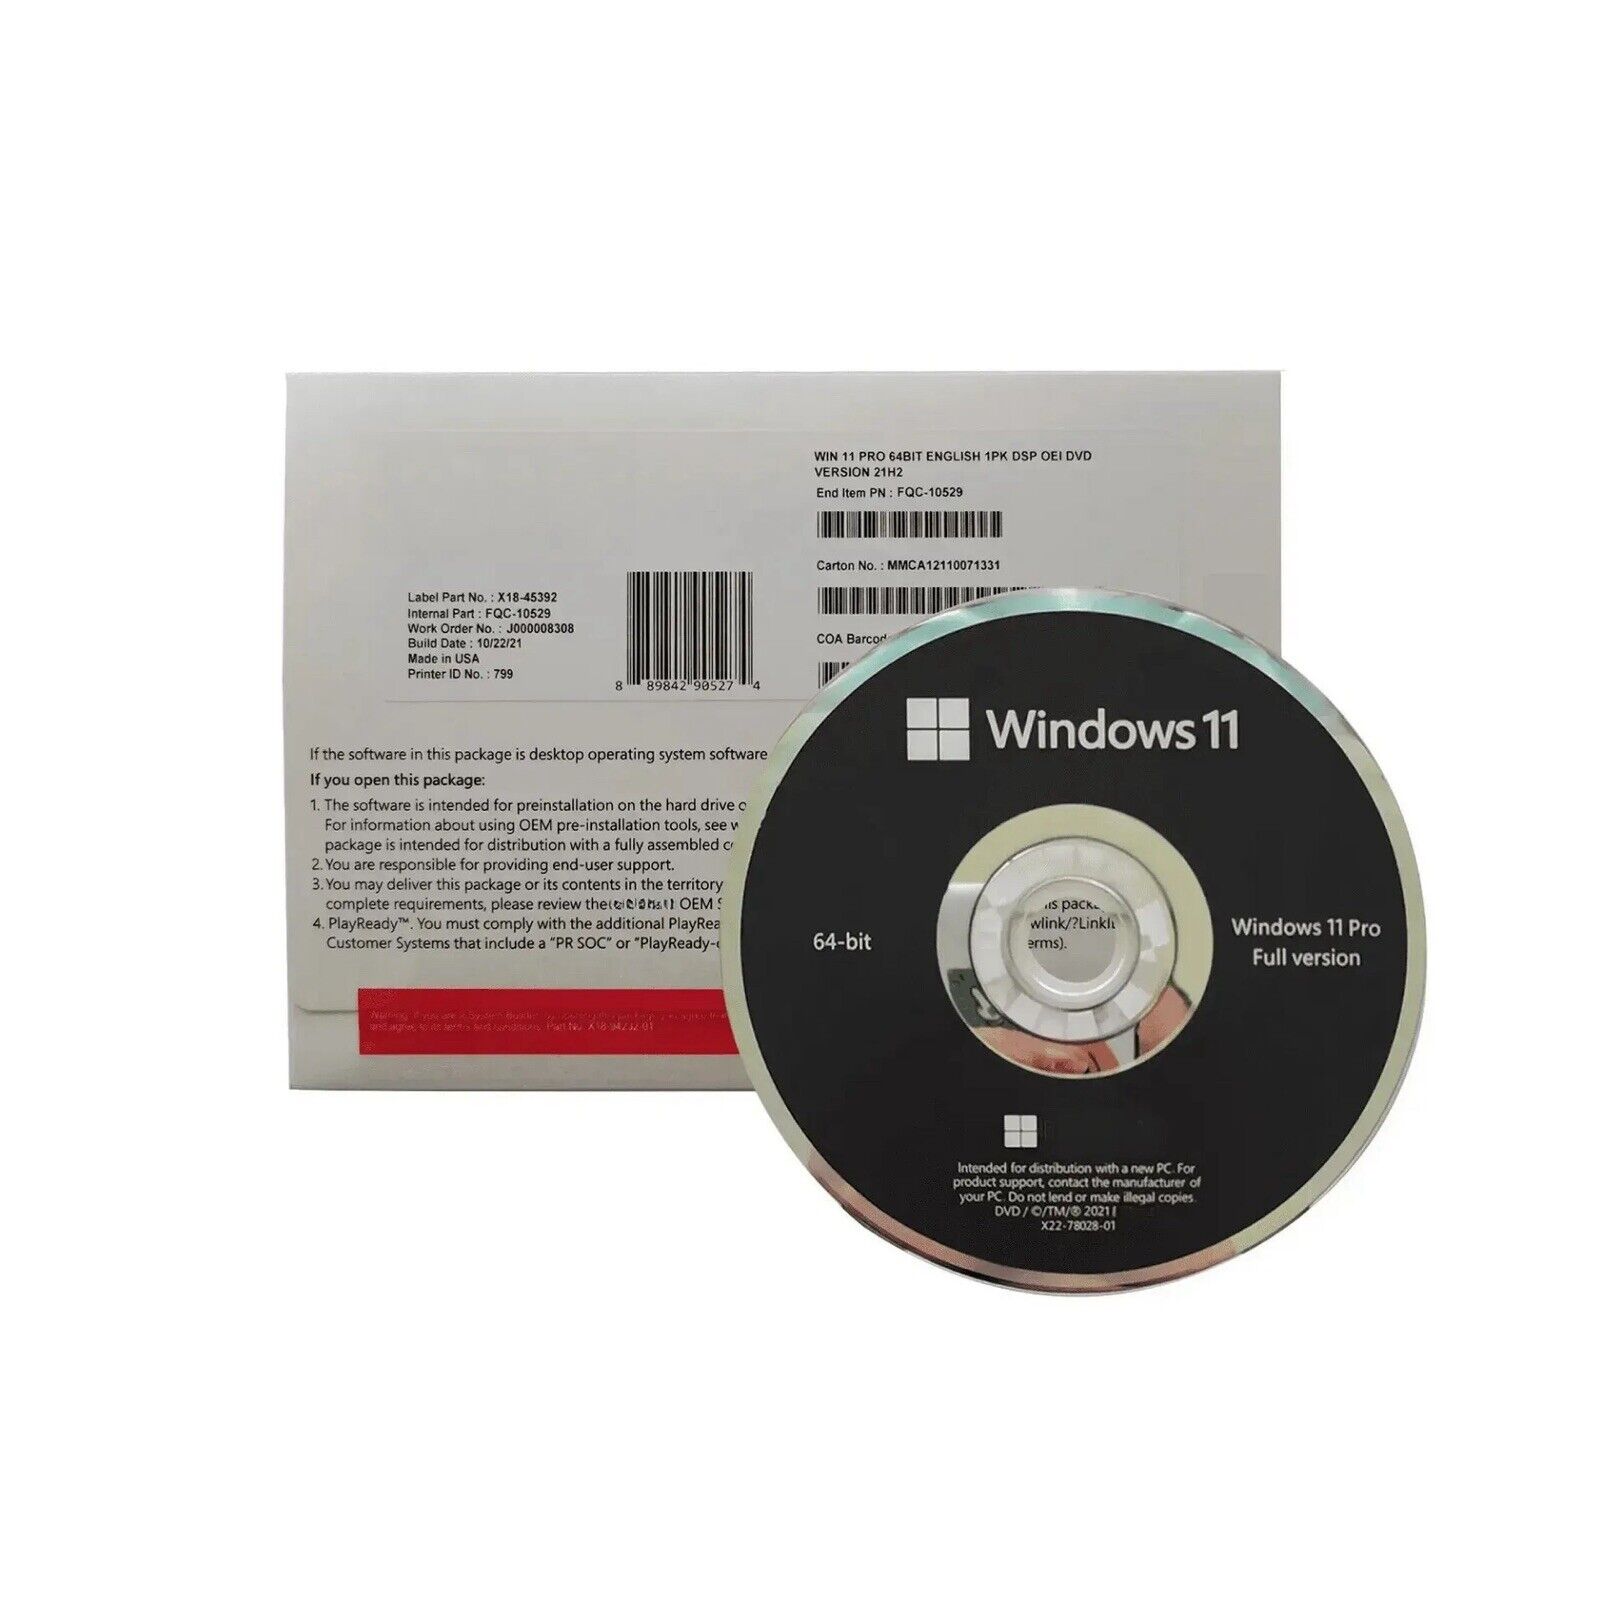 NEW Win 11 Pro 64 Bit, With DVD Installer, Product Key Sold Via Promoted Listing